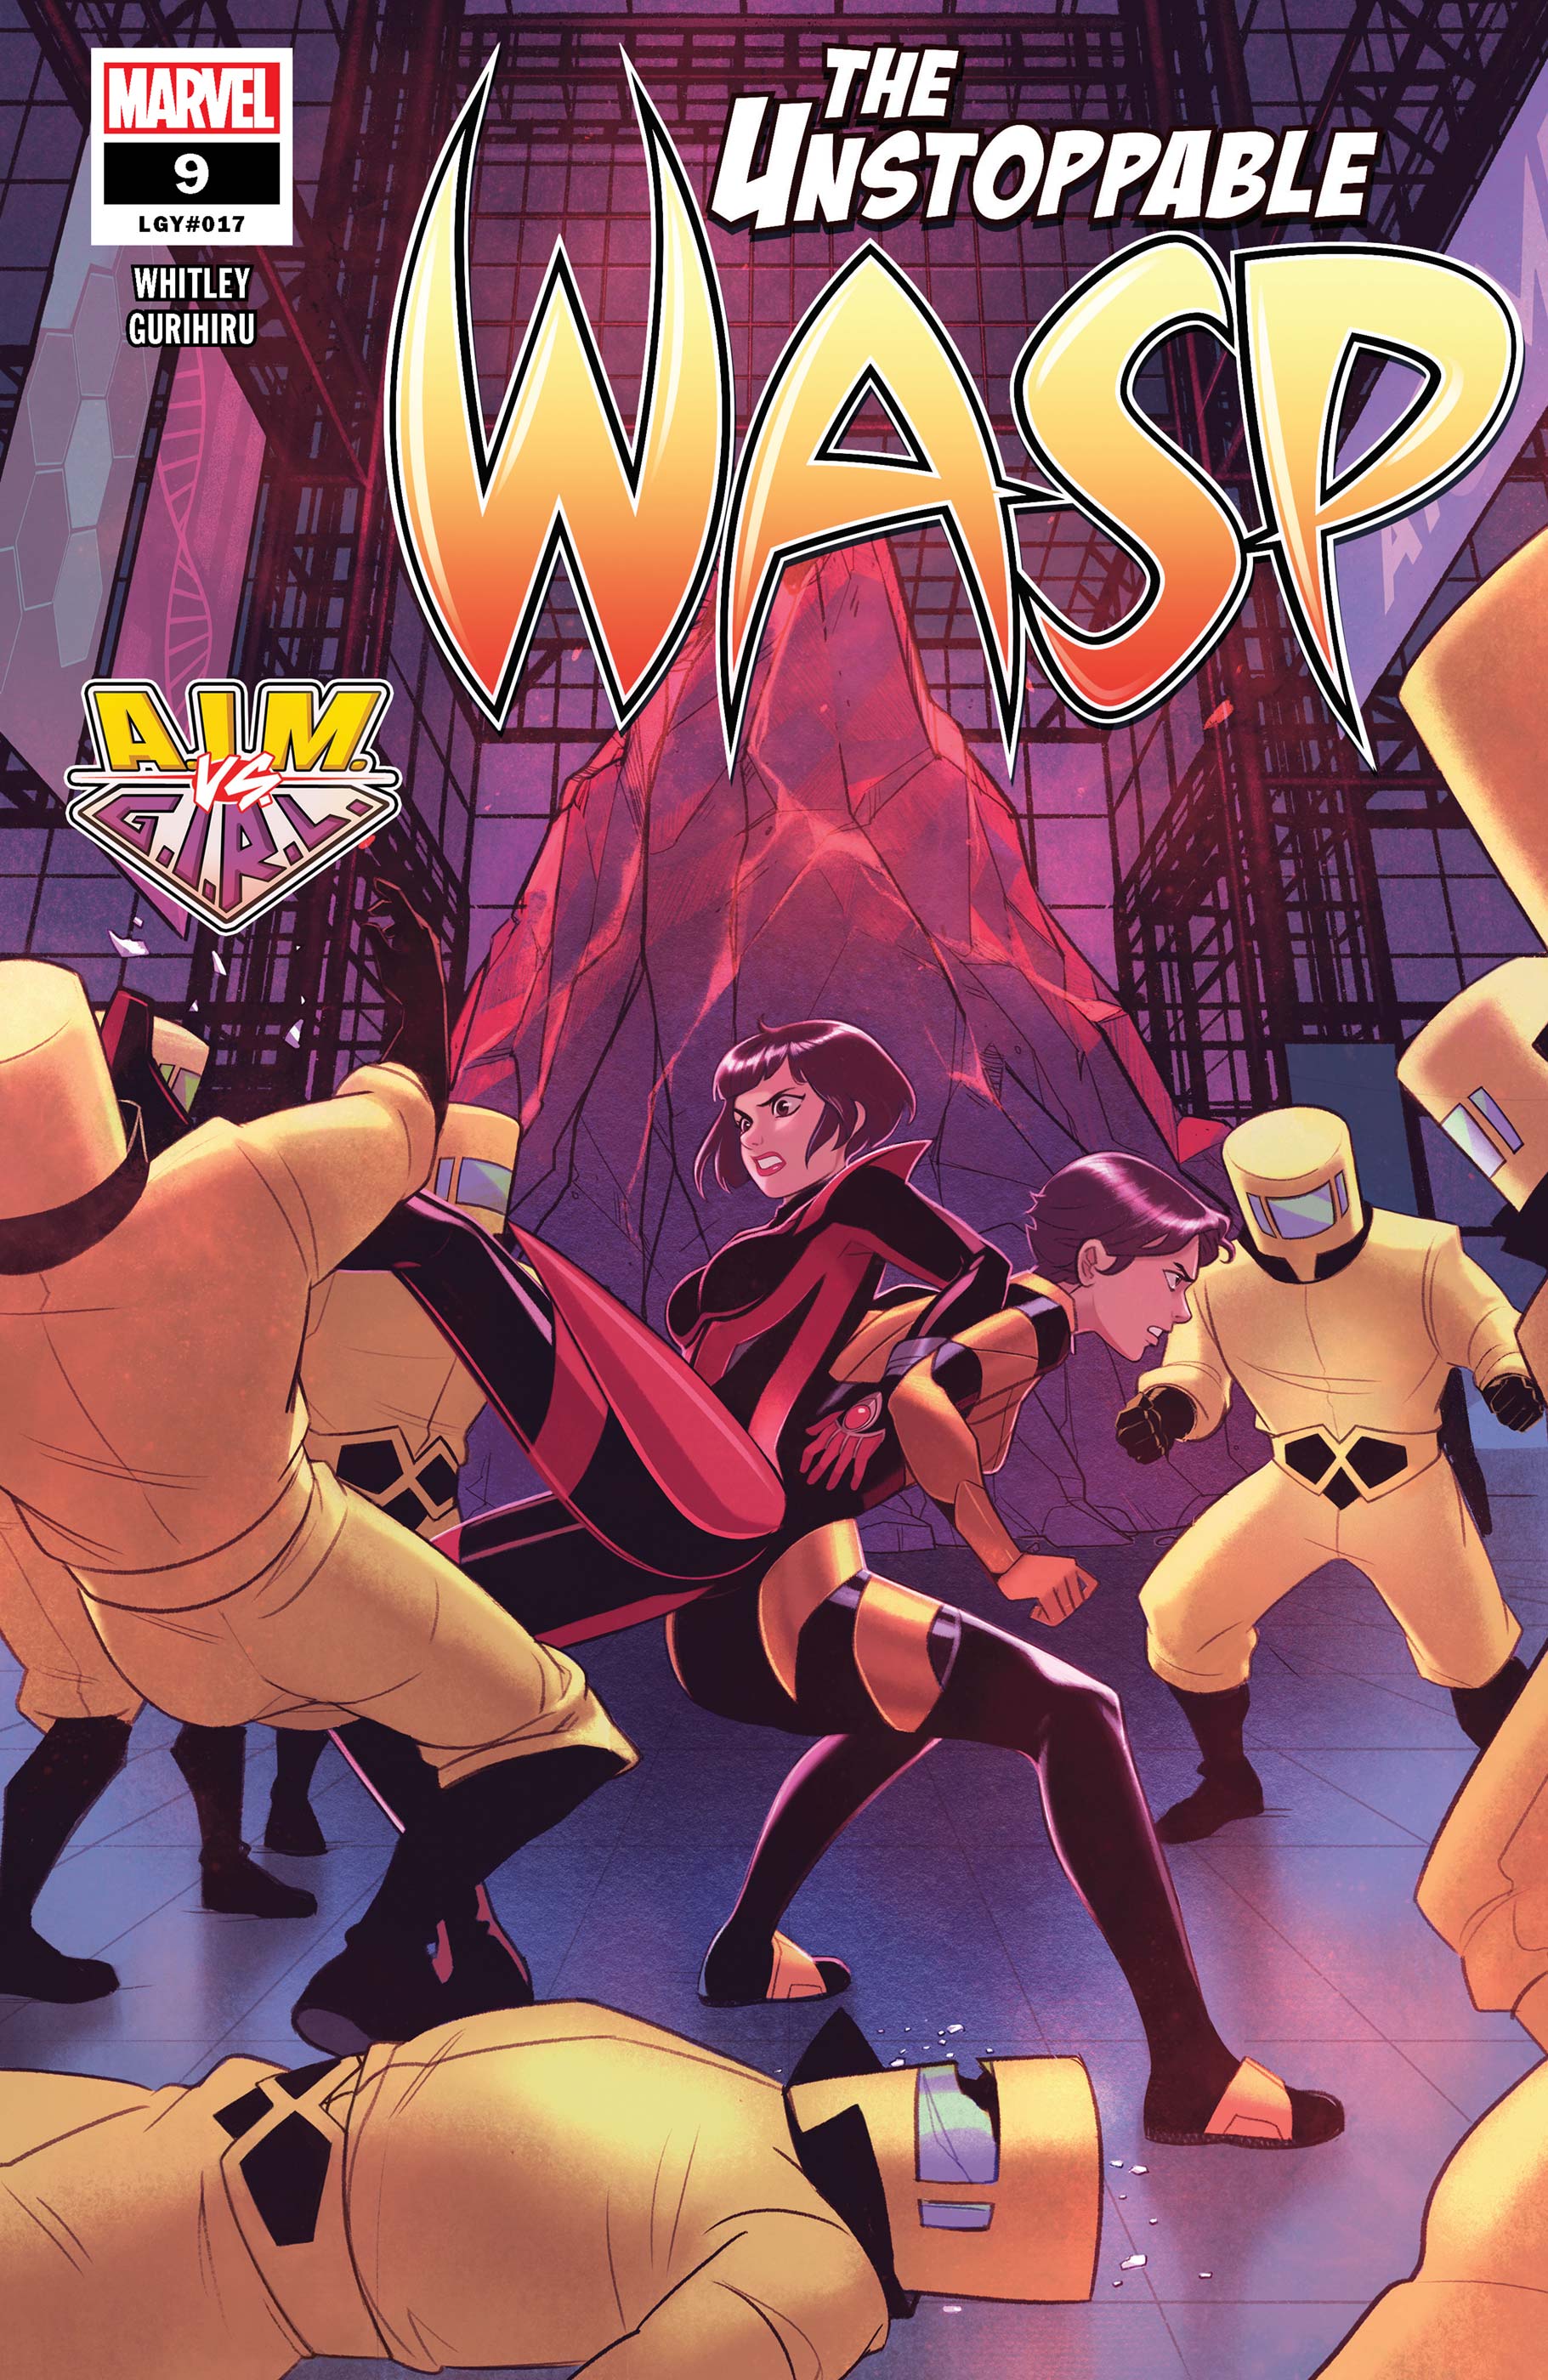 The Unstoppable Wasp (2018) #9